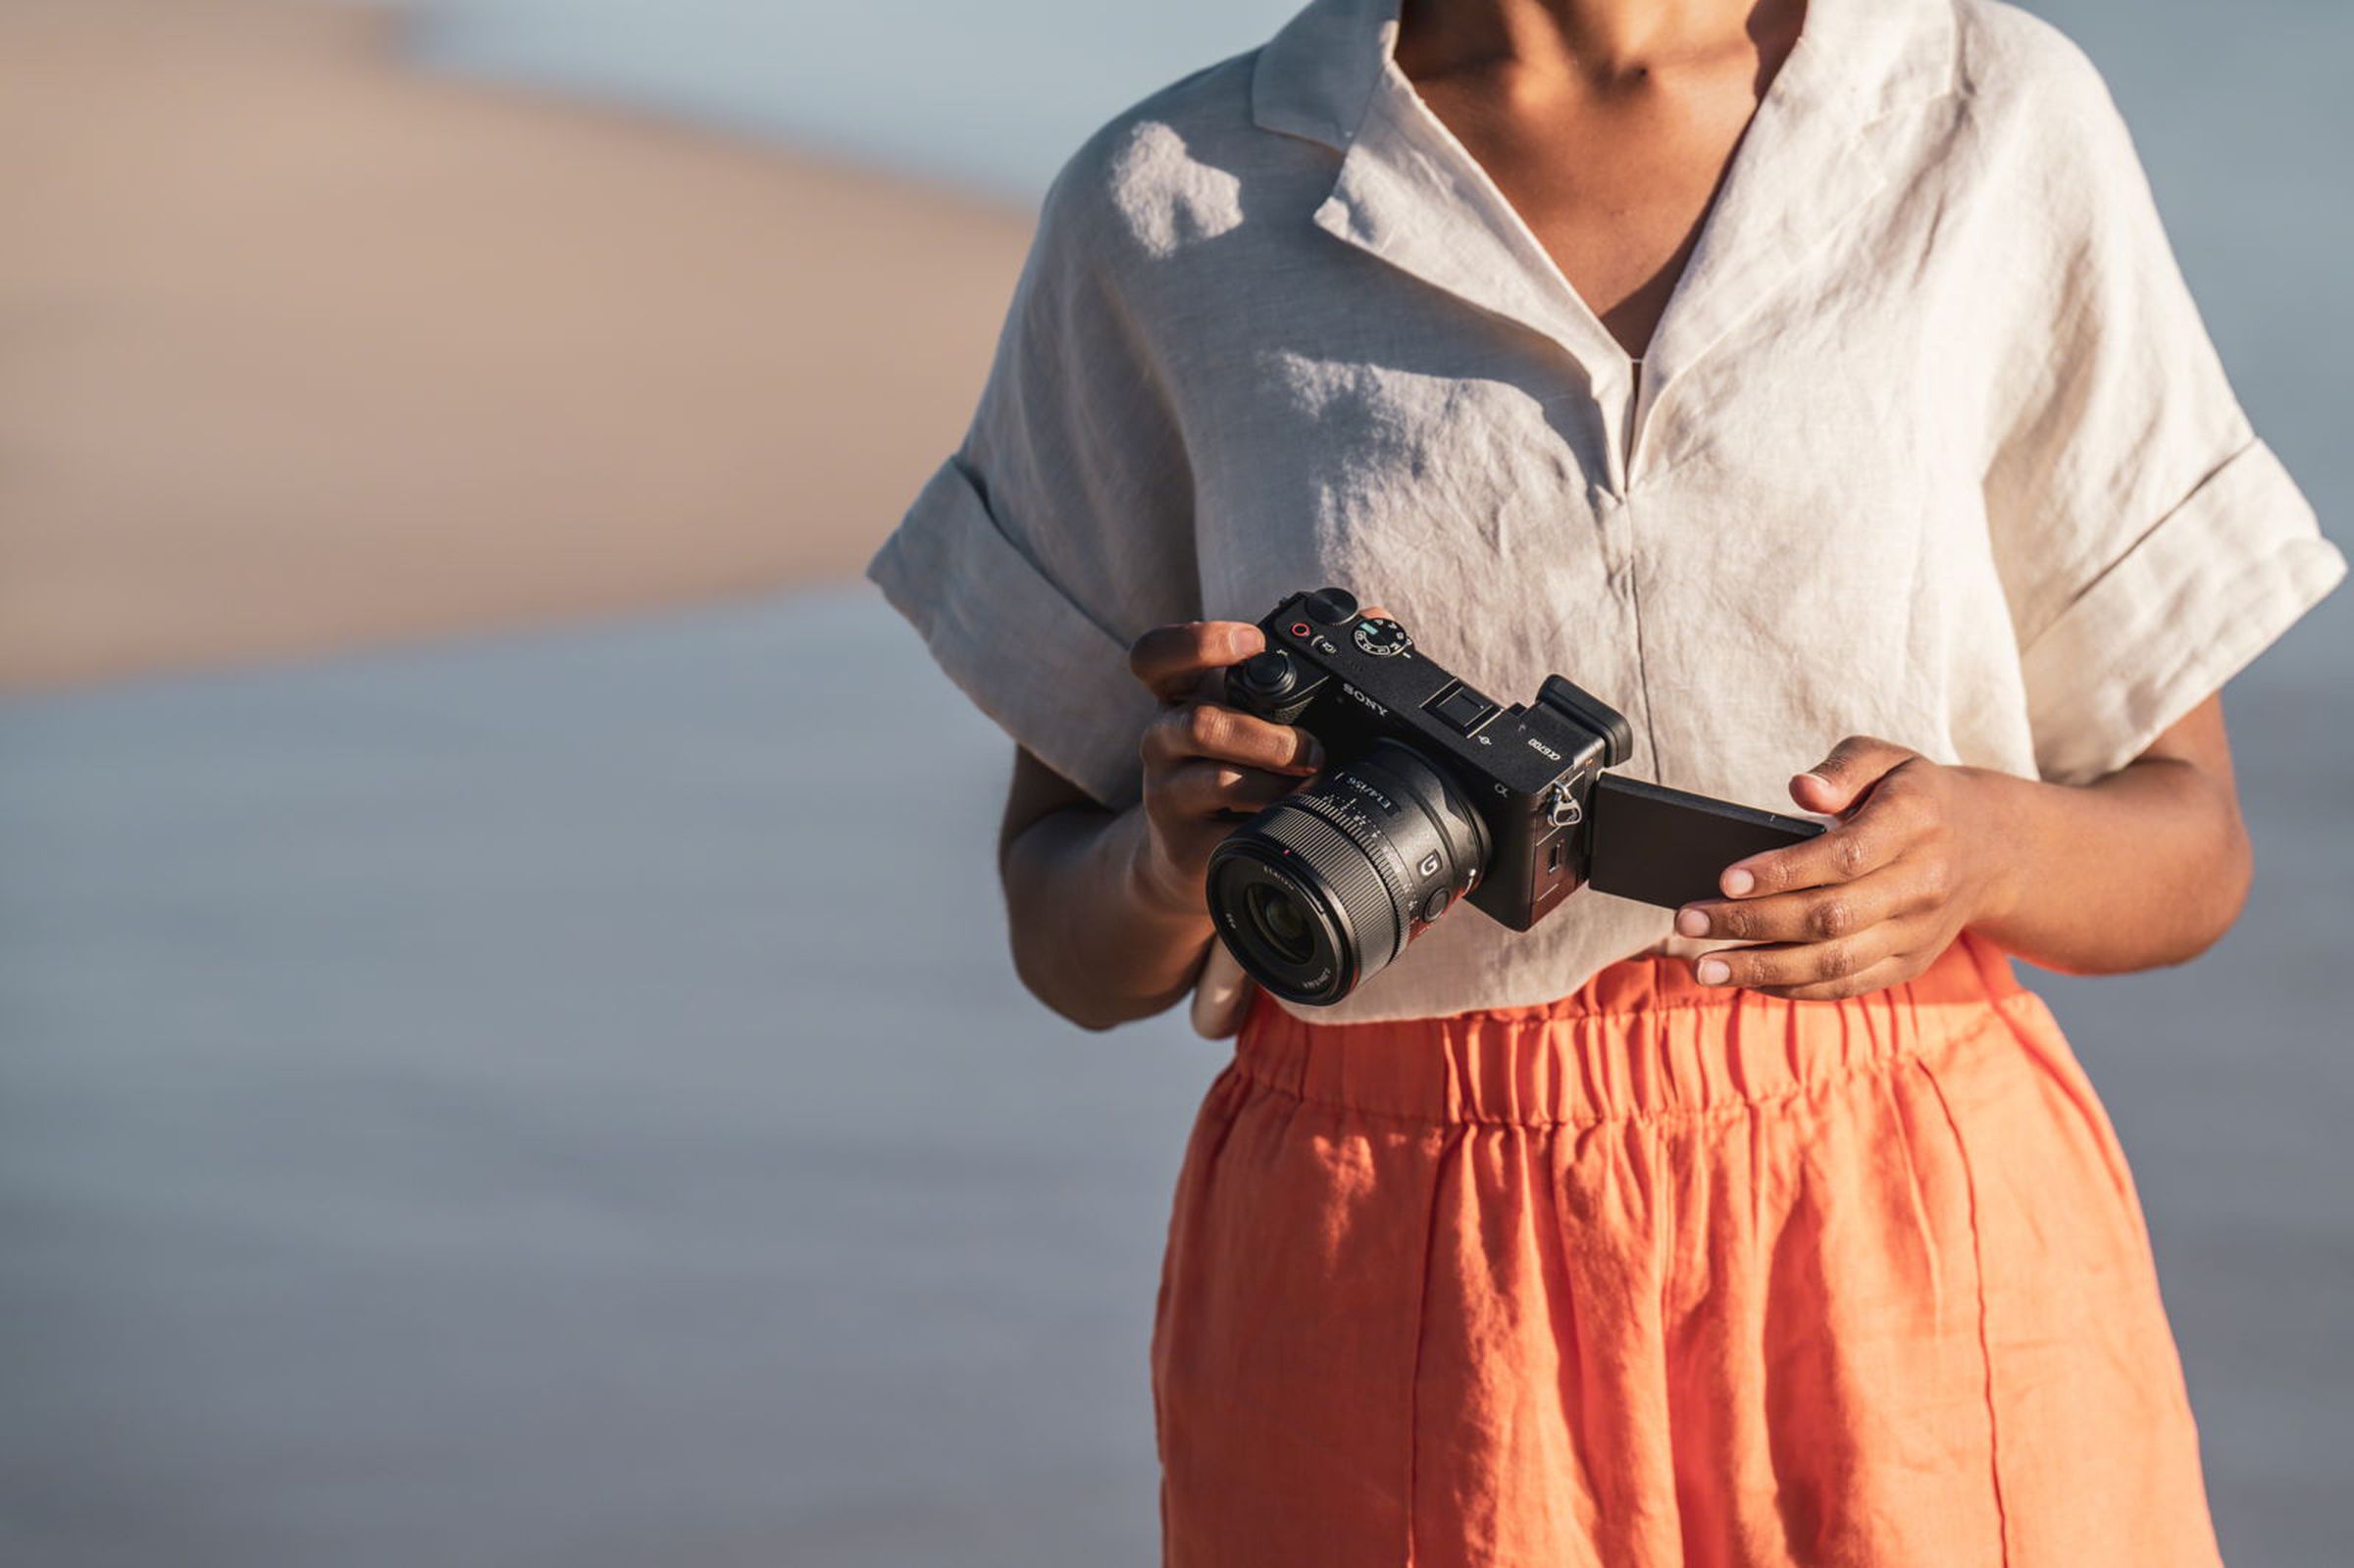 A picture of a person, standing on a beach and looking down at the camera, which has its LCD flipped out. The person’s head is not visible.